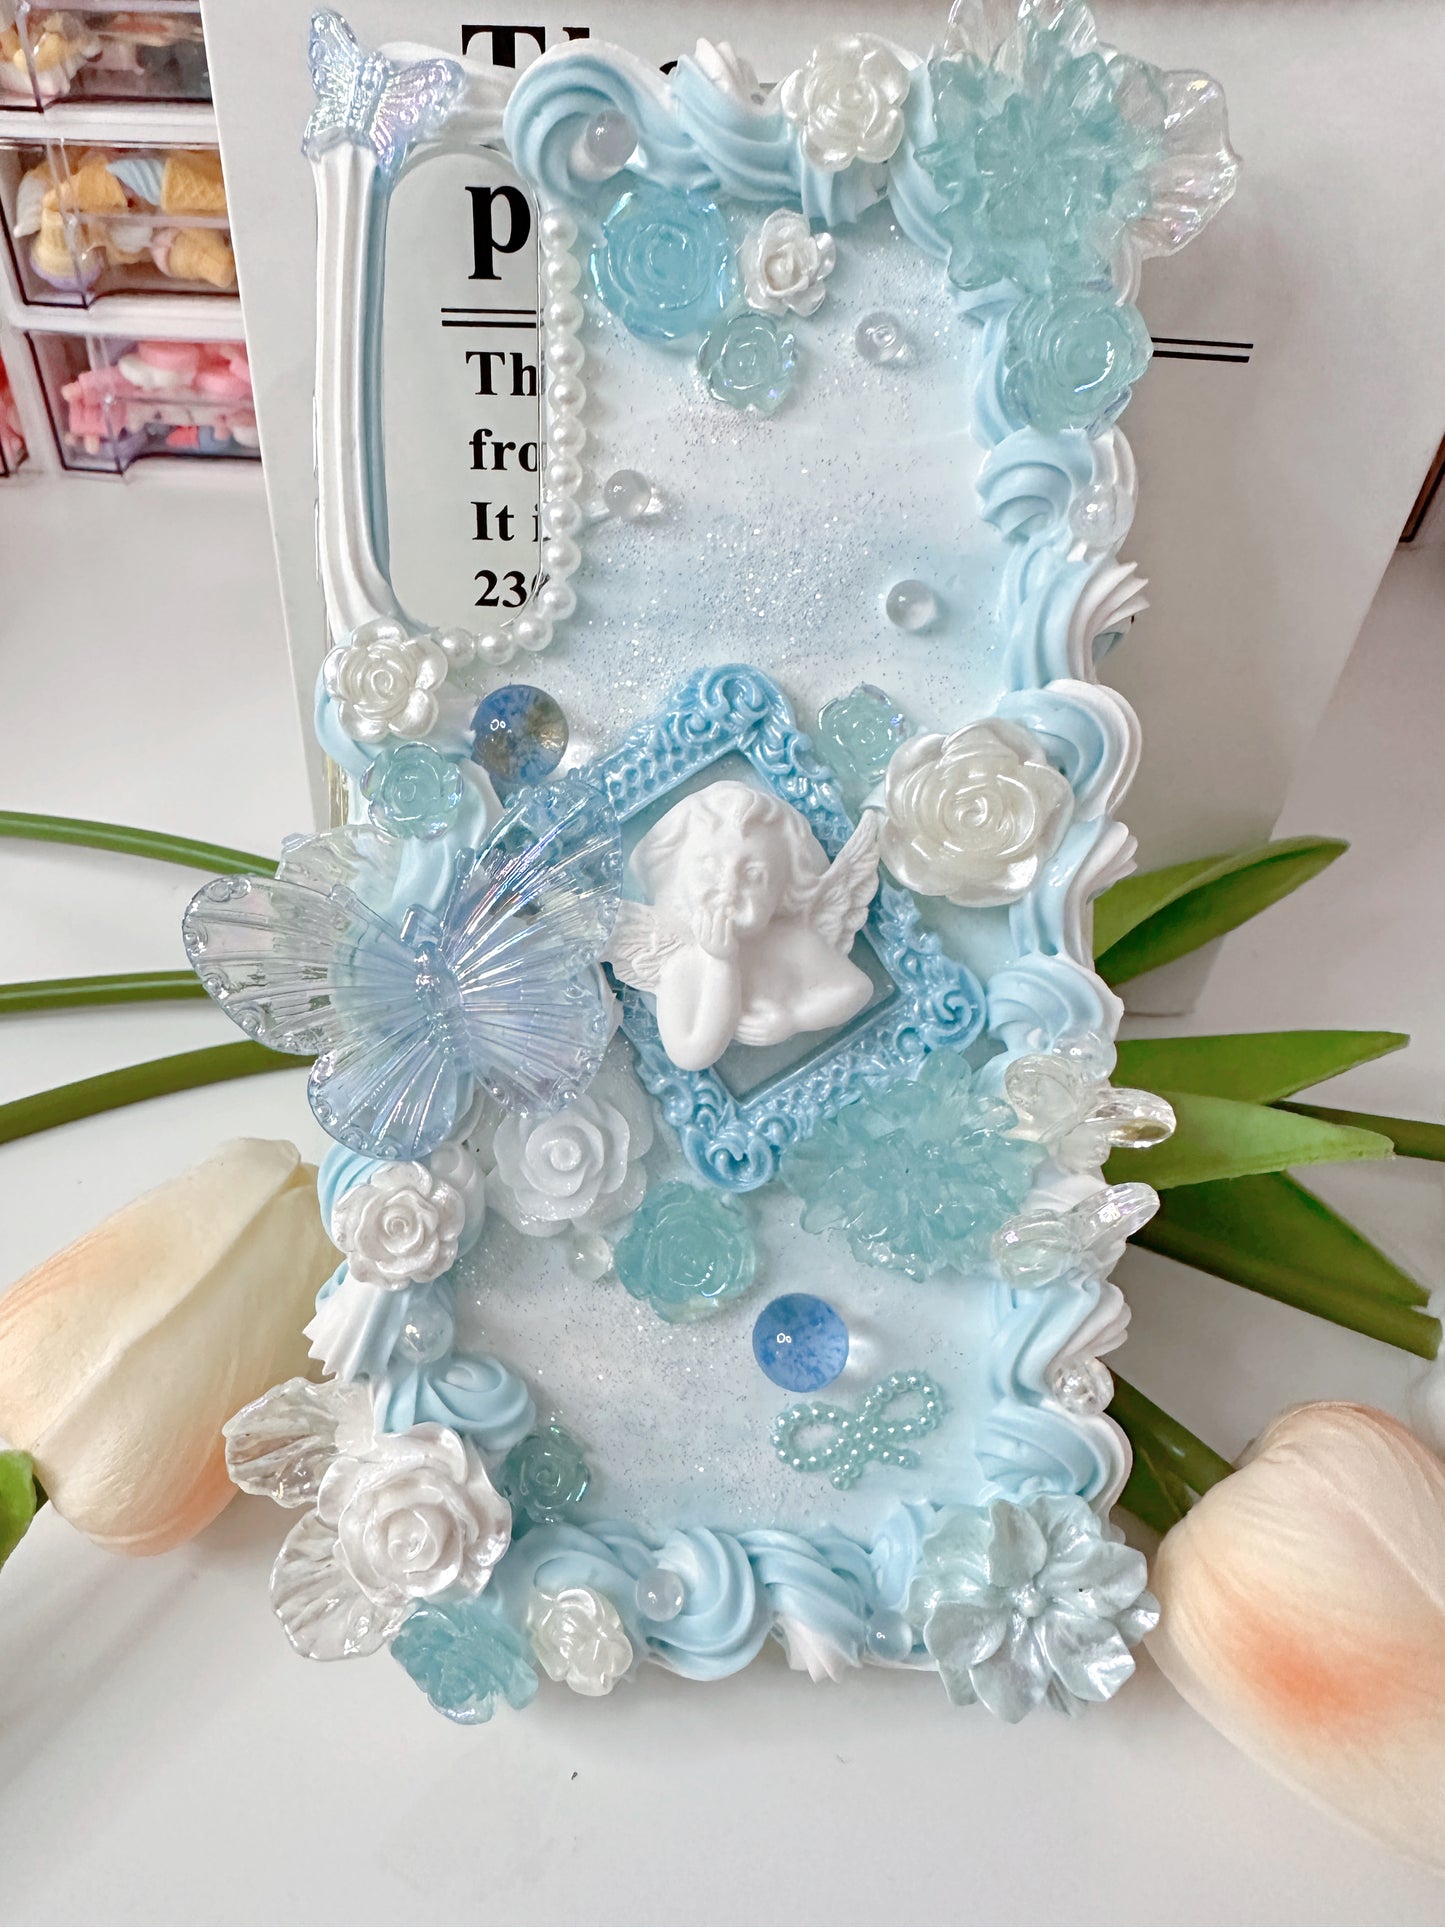 Whipped Cream Custom Decoden Phone Case Personalized Phone Cover, blue flowers case Simple style, Butterfly,custommade case for wedding gift